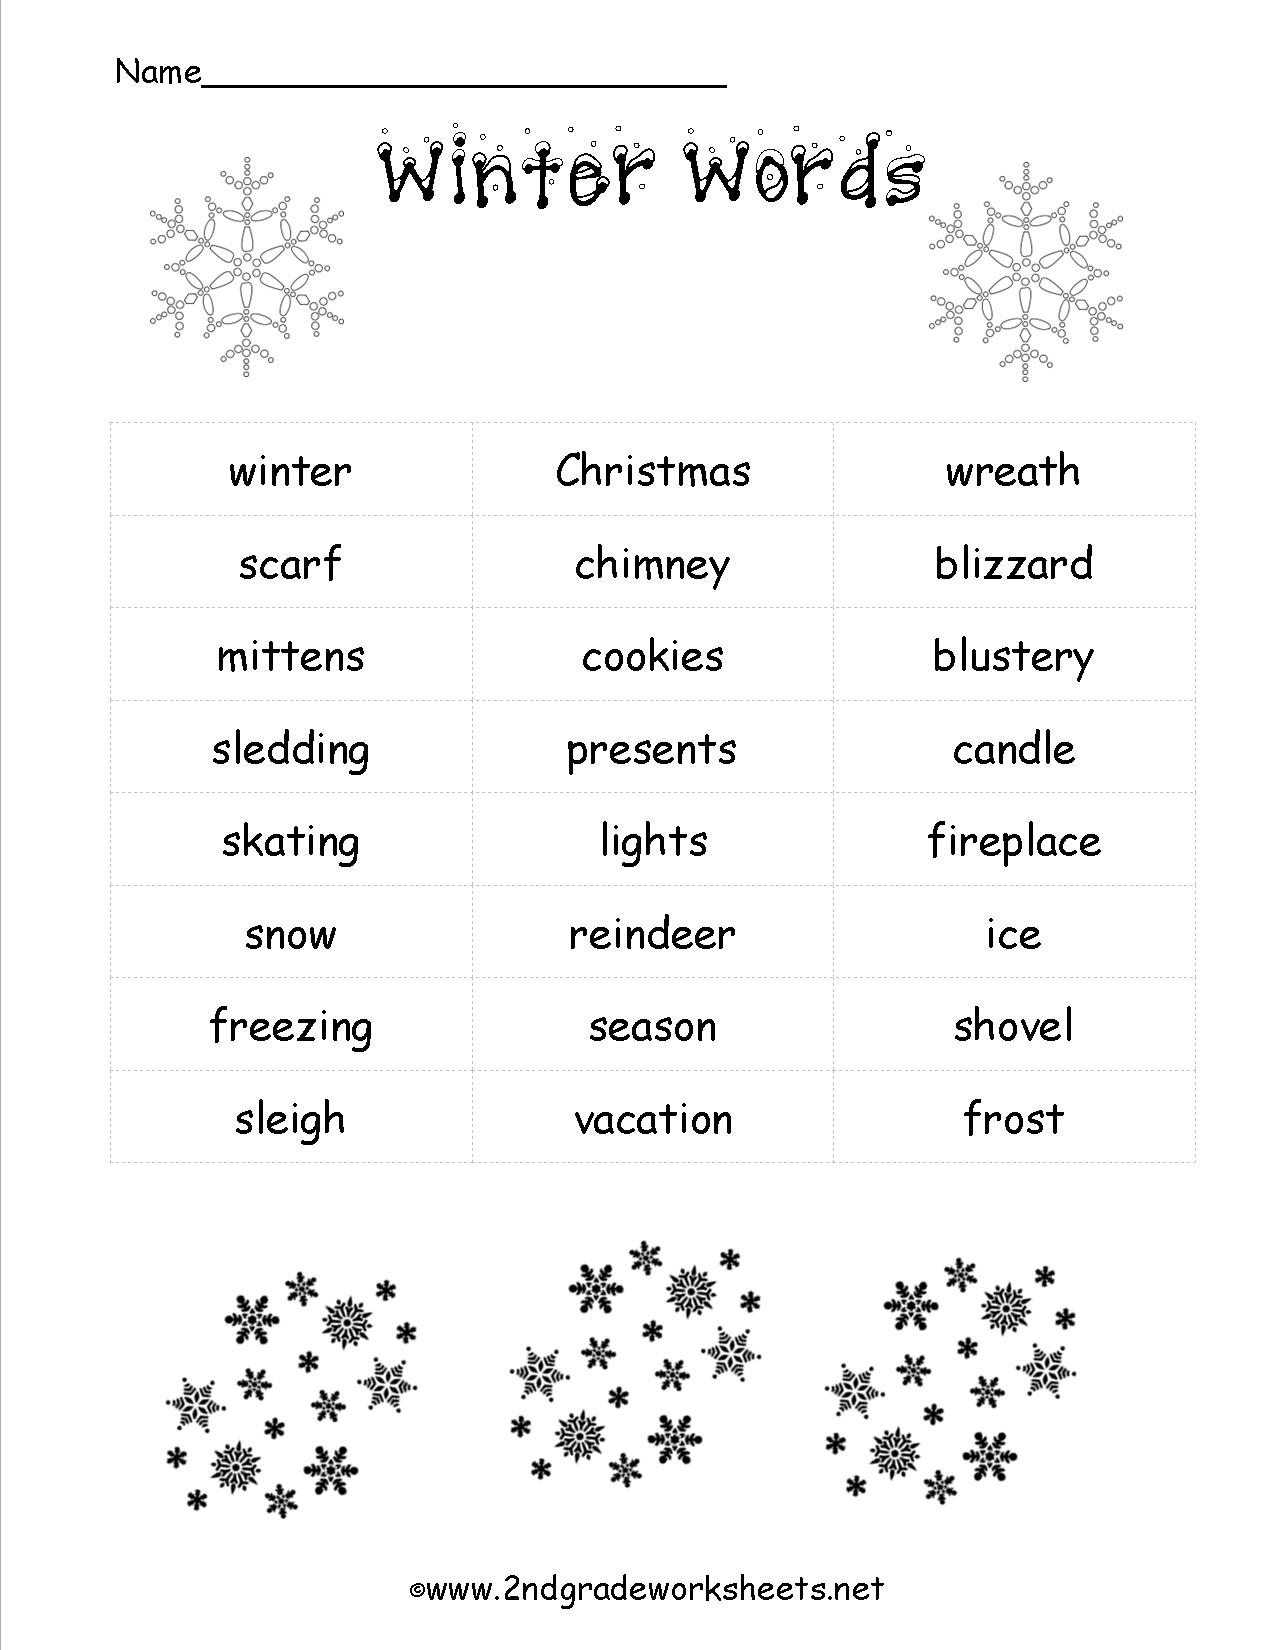 Christmas Worksheets And Printouts | Free Printable Christmas Worksheets